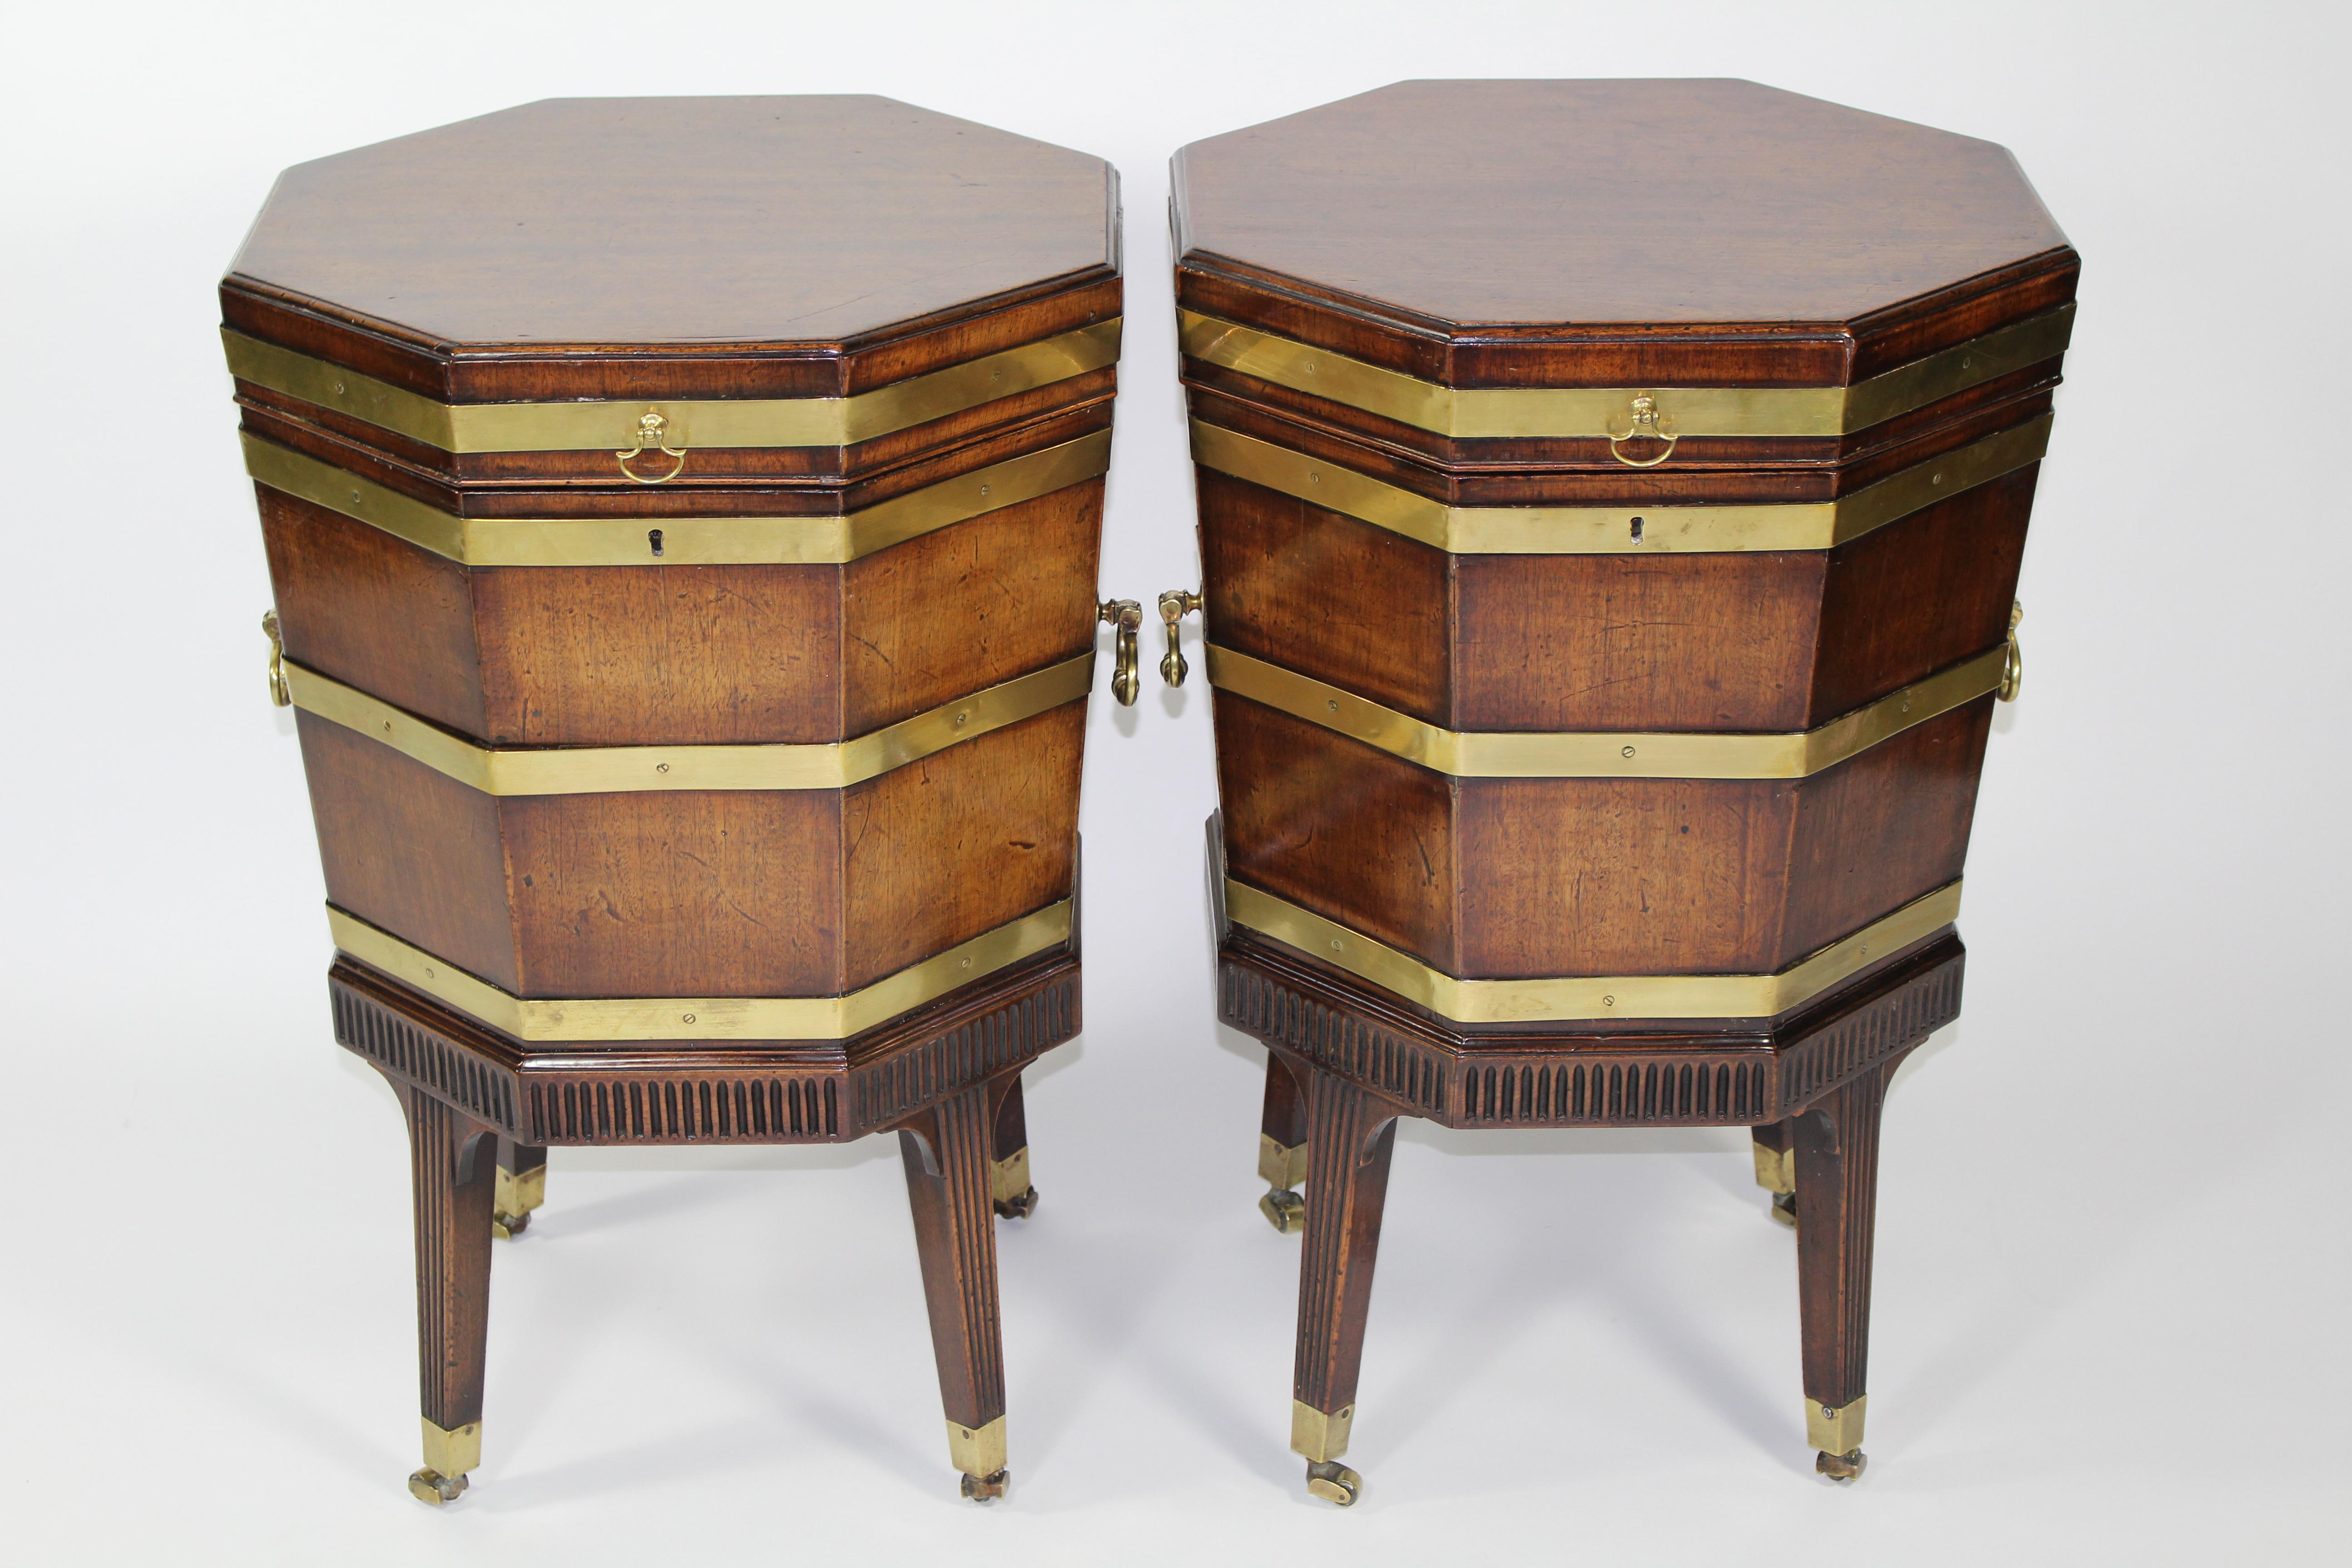 An outstanding pair of Georgian octagonal brass bound mahogany wine coolers/ cellerets also known as gardes de vin. Which are recorded in George Hepplewhite’s The Cabinet Maker and Upholstery’s 1st Edition 1788, 2nd Edition 1789 and 3rd Edition